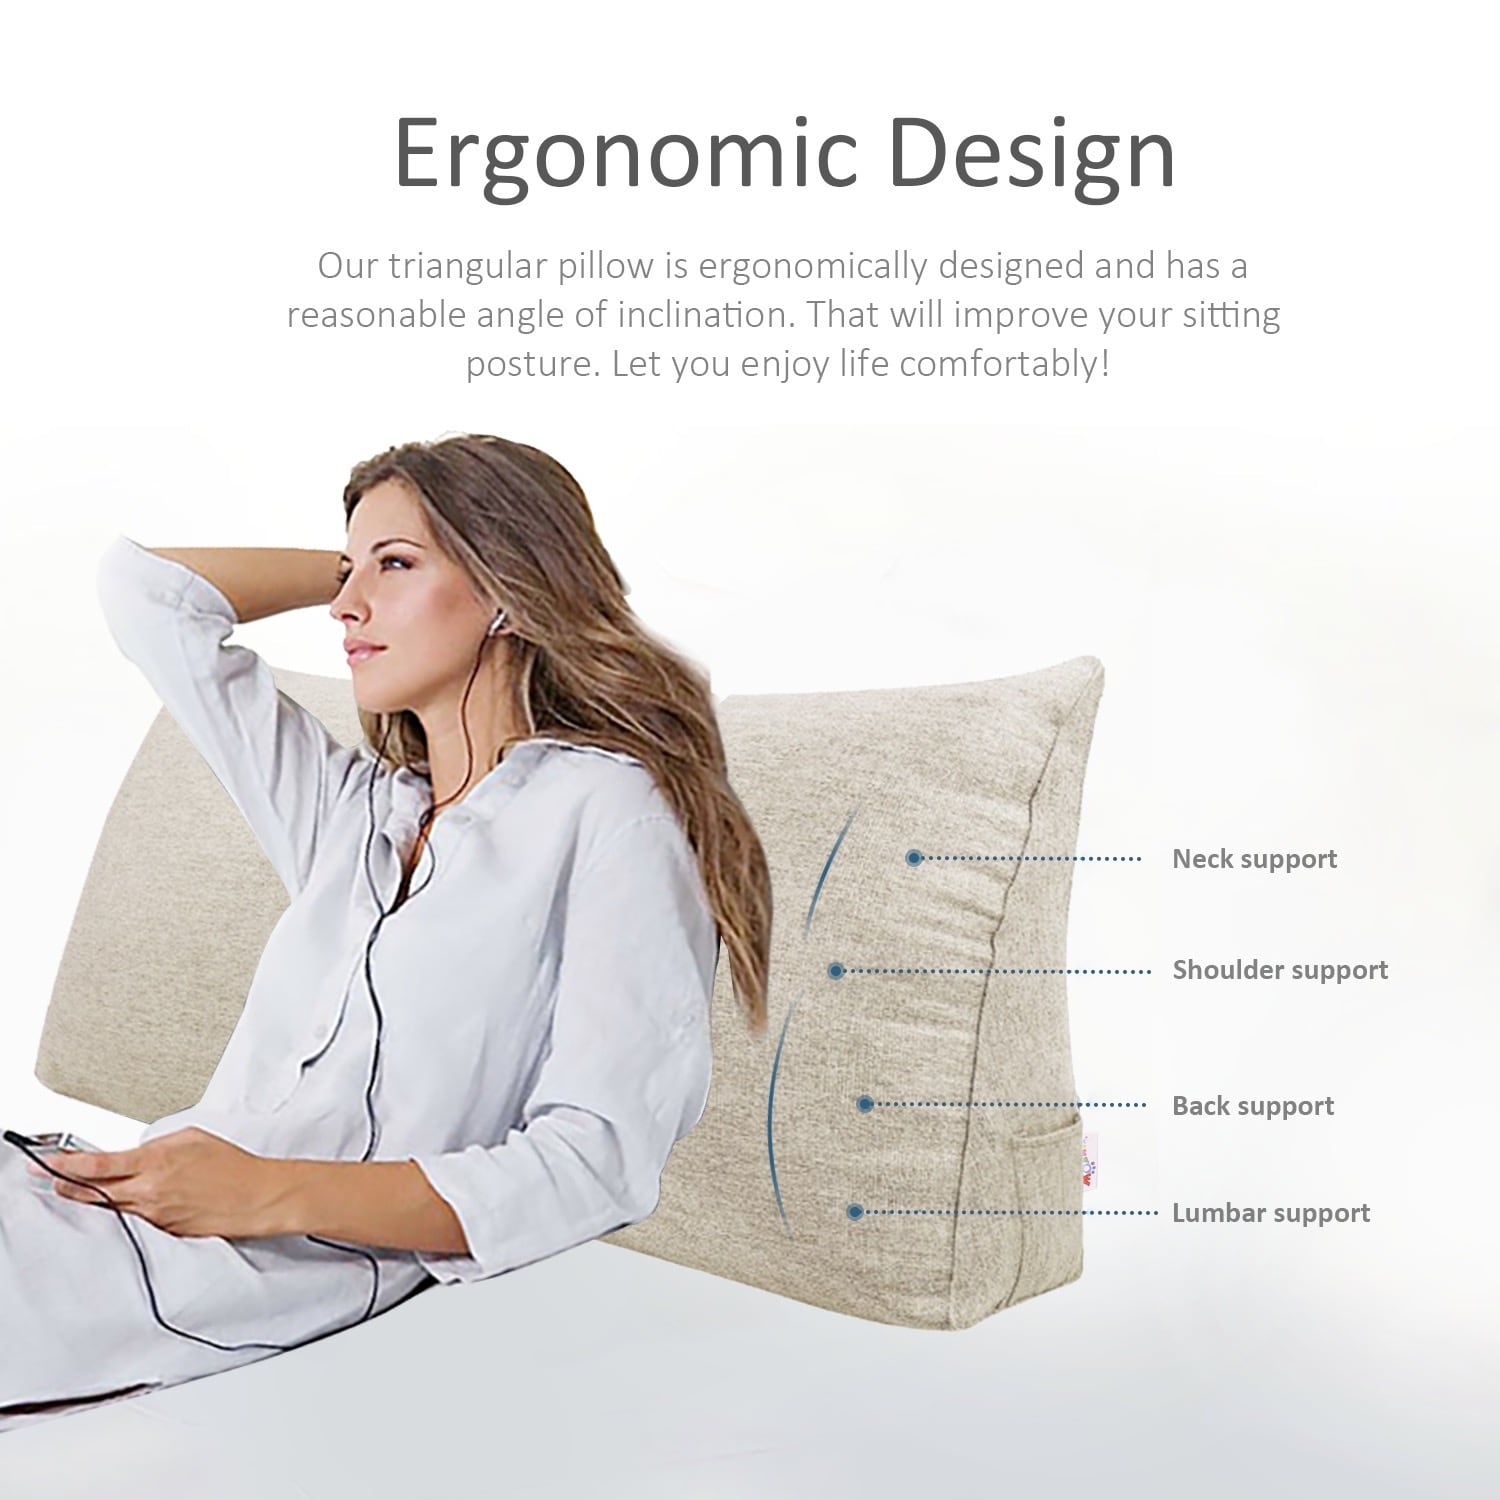 Support, Posture, and Specialty Pillows